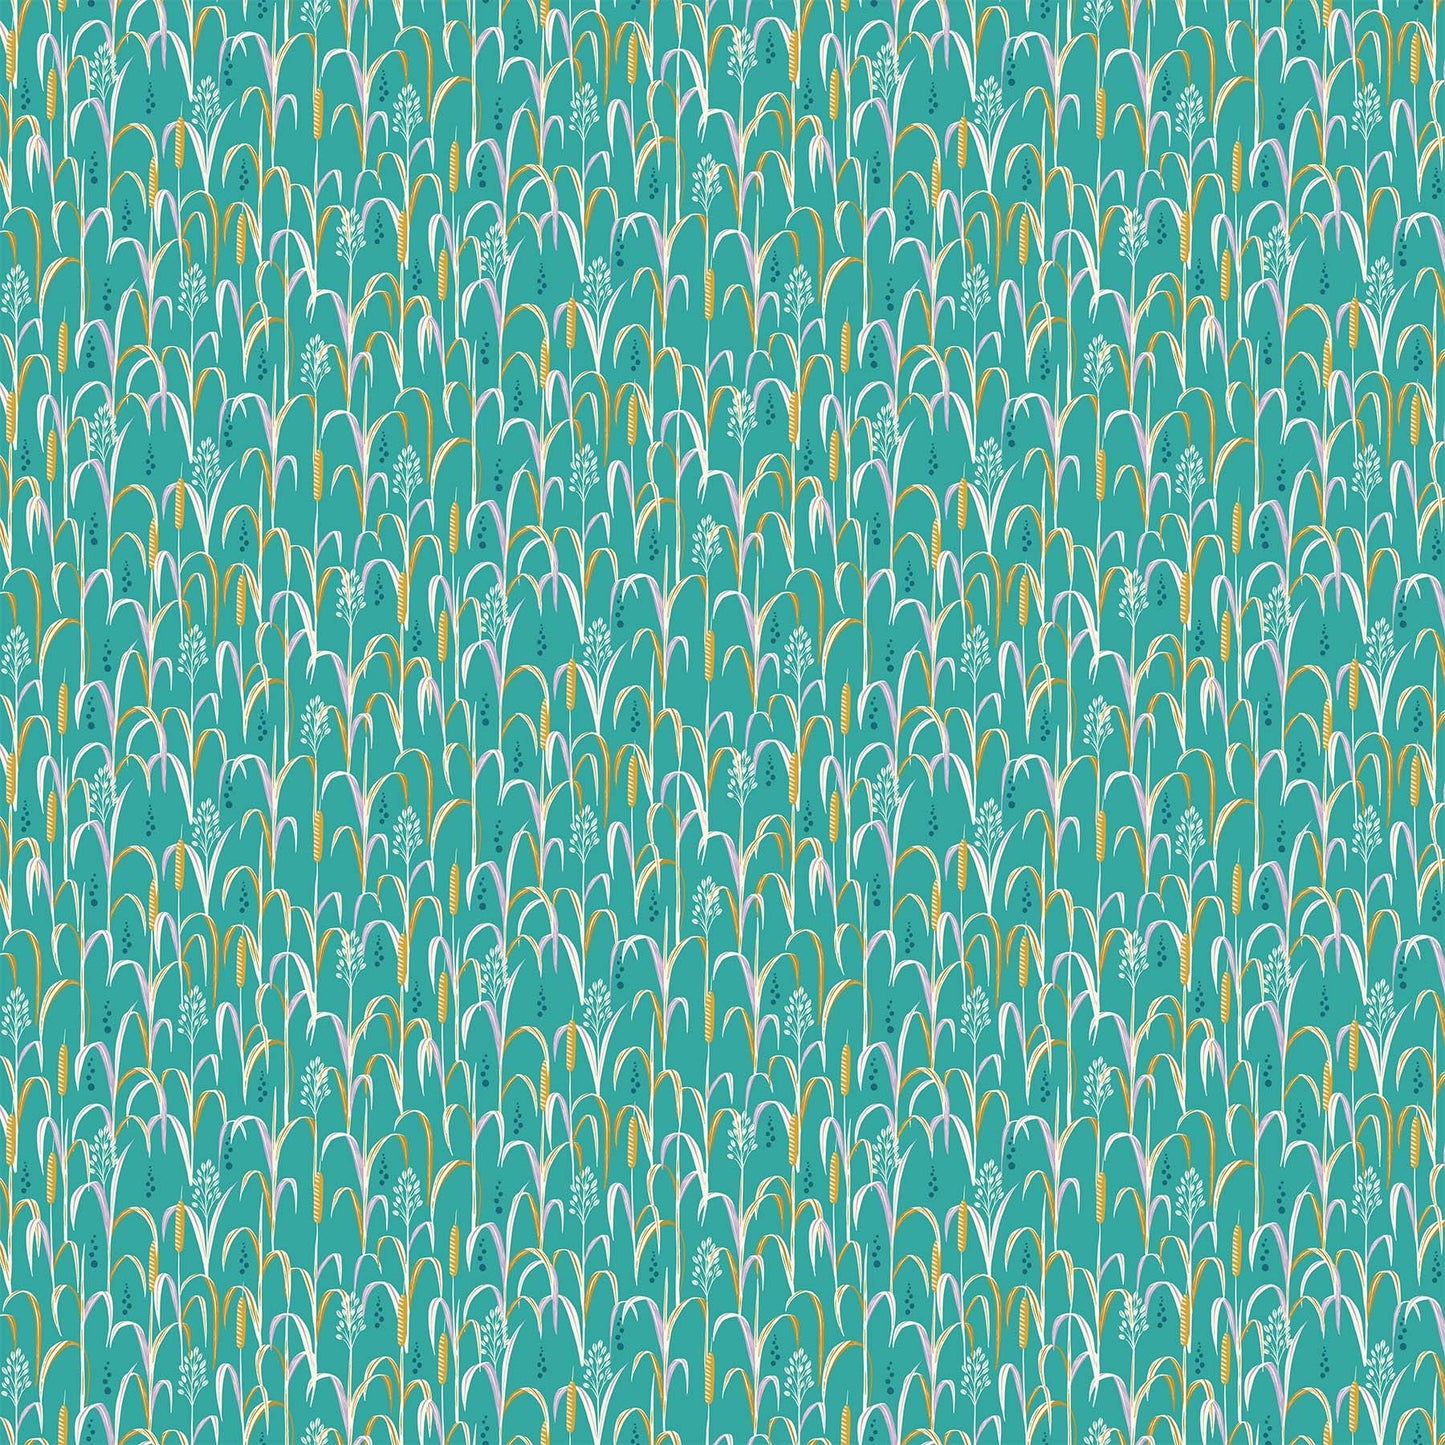 Cattails - Teal - Pond Tales - homesewn